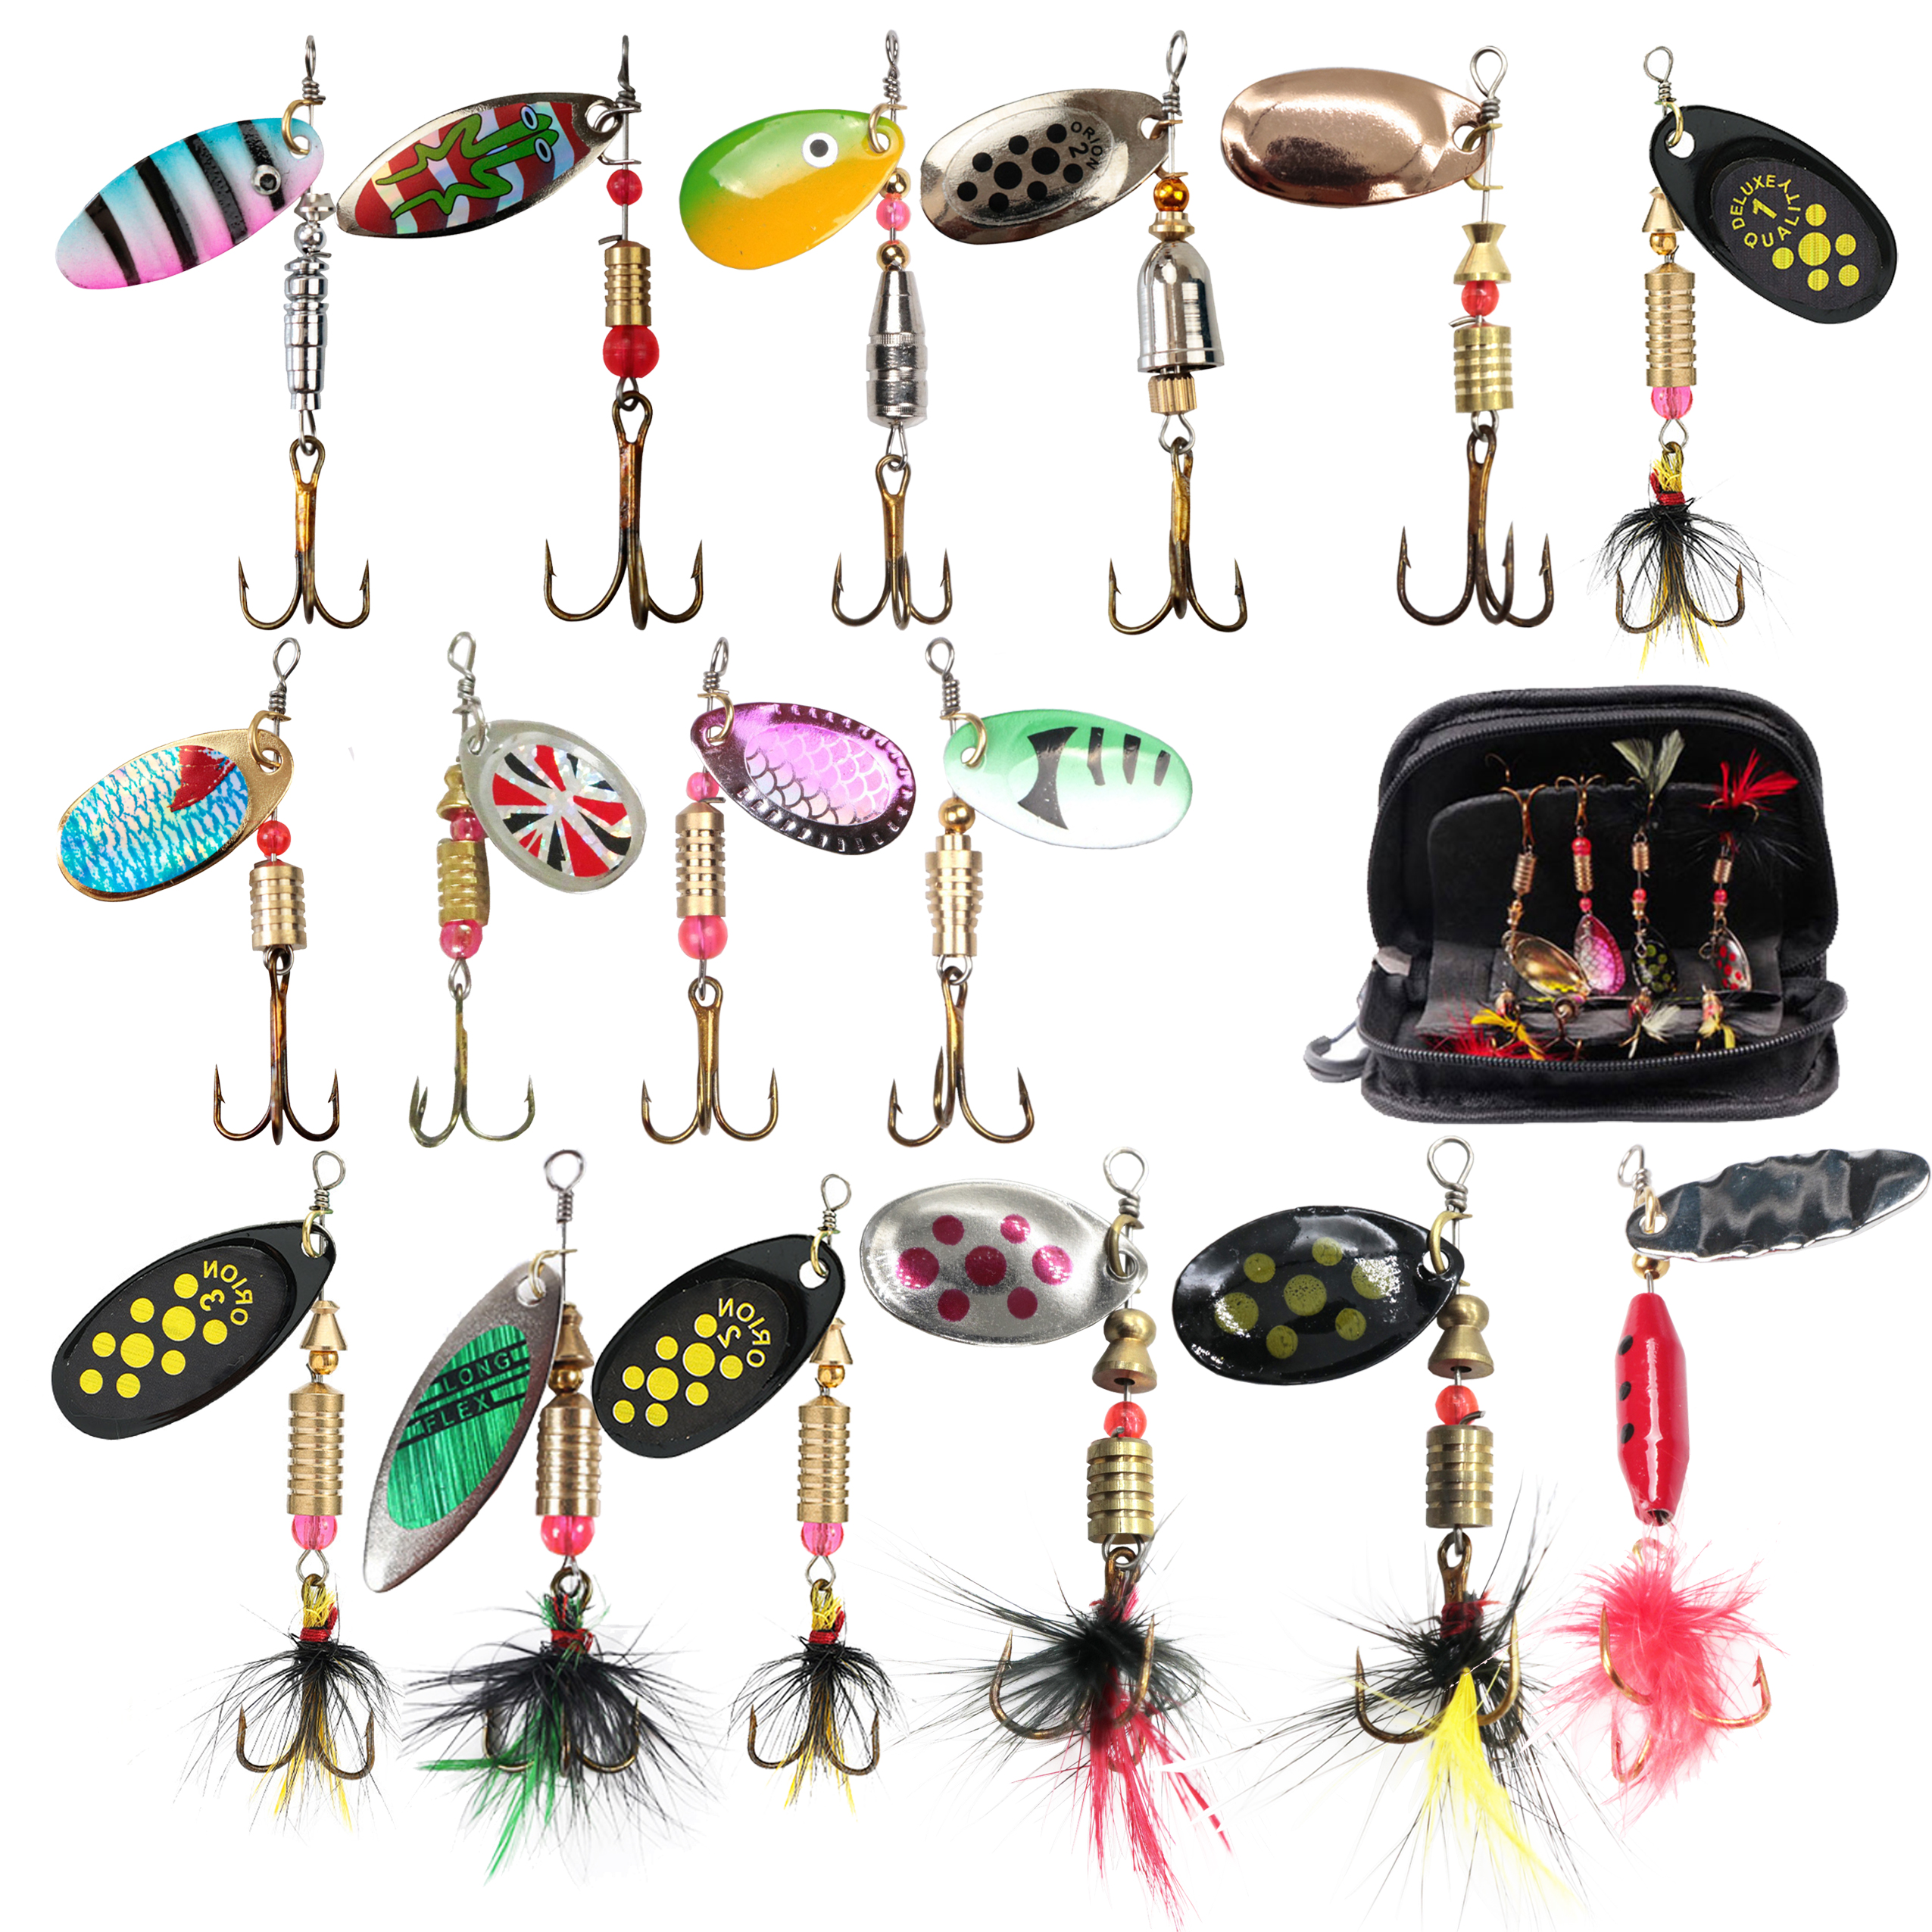 FREE FISHER 16pcs/Set Fishing Spinnerbaits Mixed Metal Rotating Sequins with Treble Hooks Spoon Lures Artificial Baits for Pike/Bass/Catfish